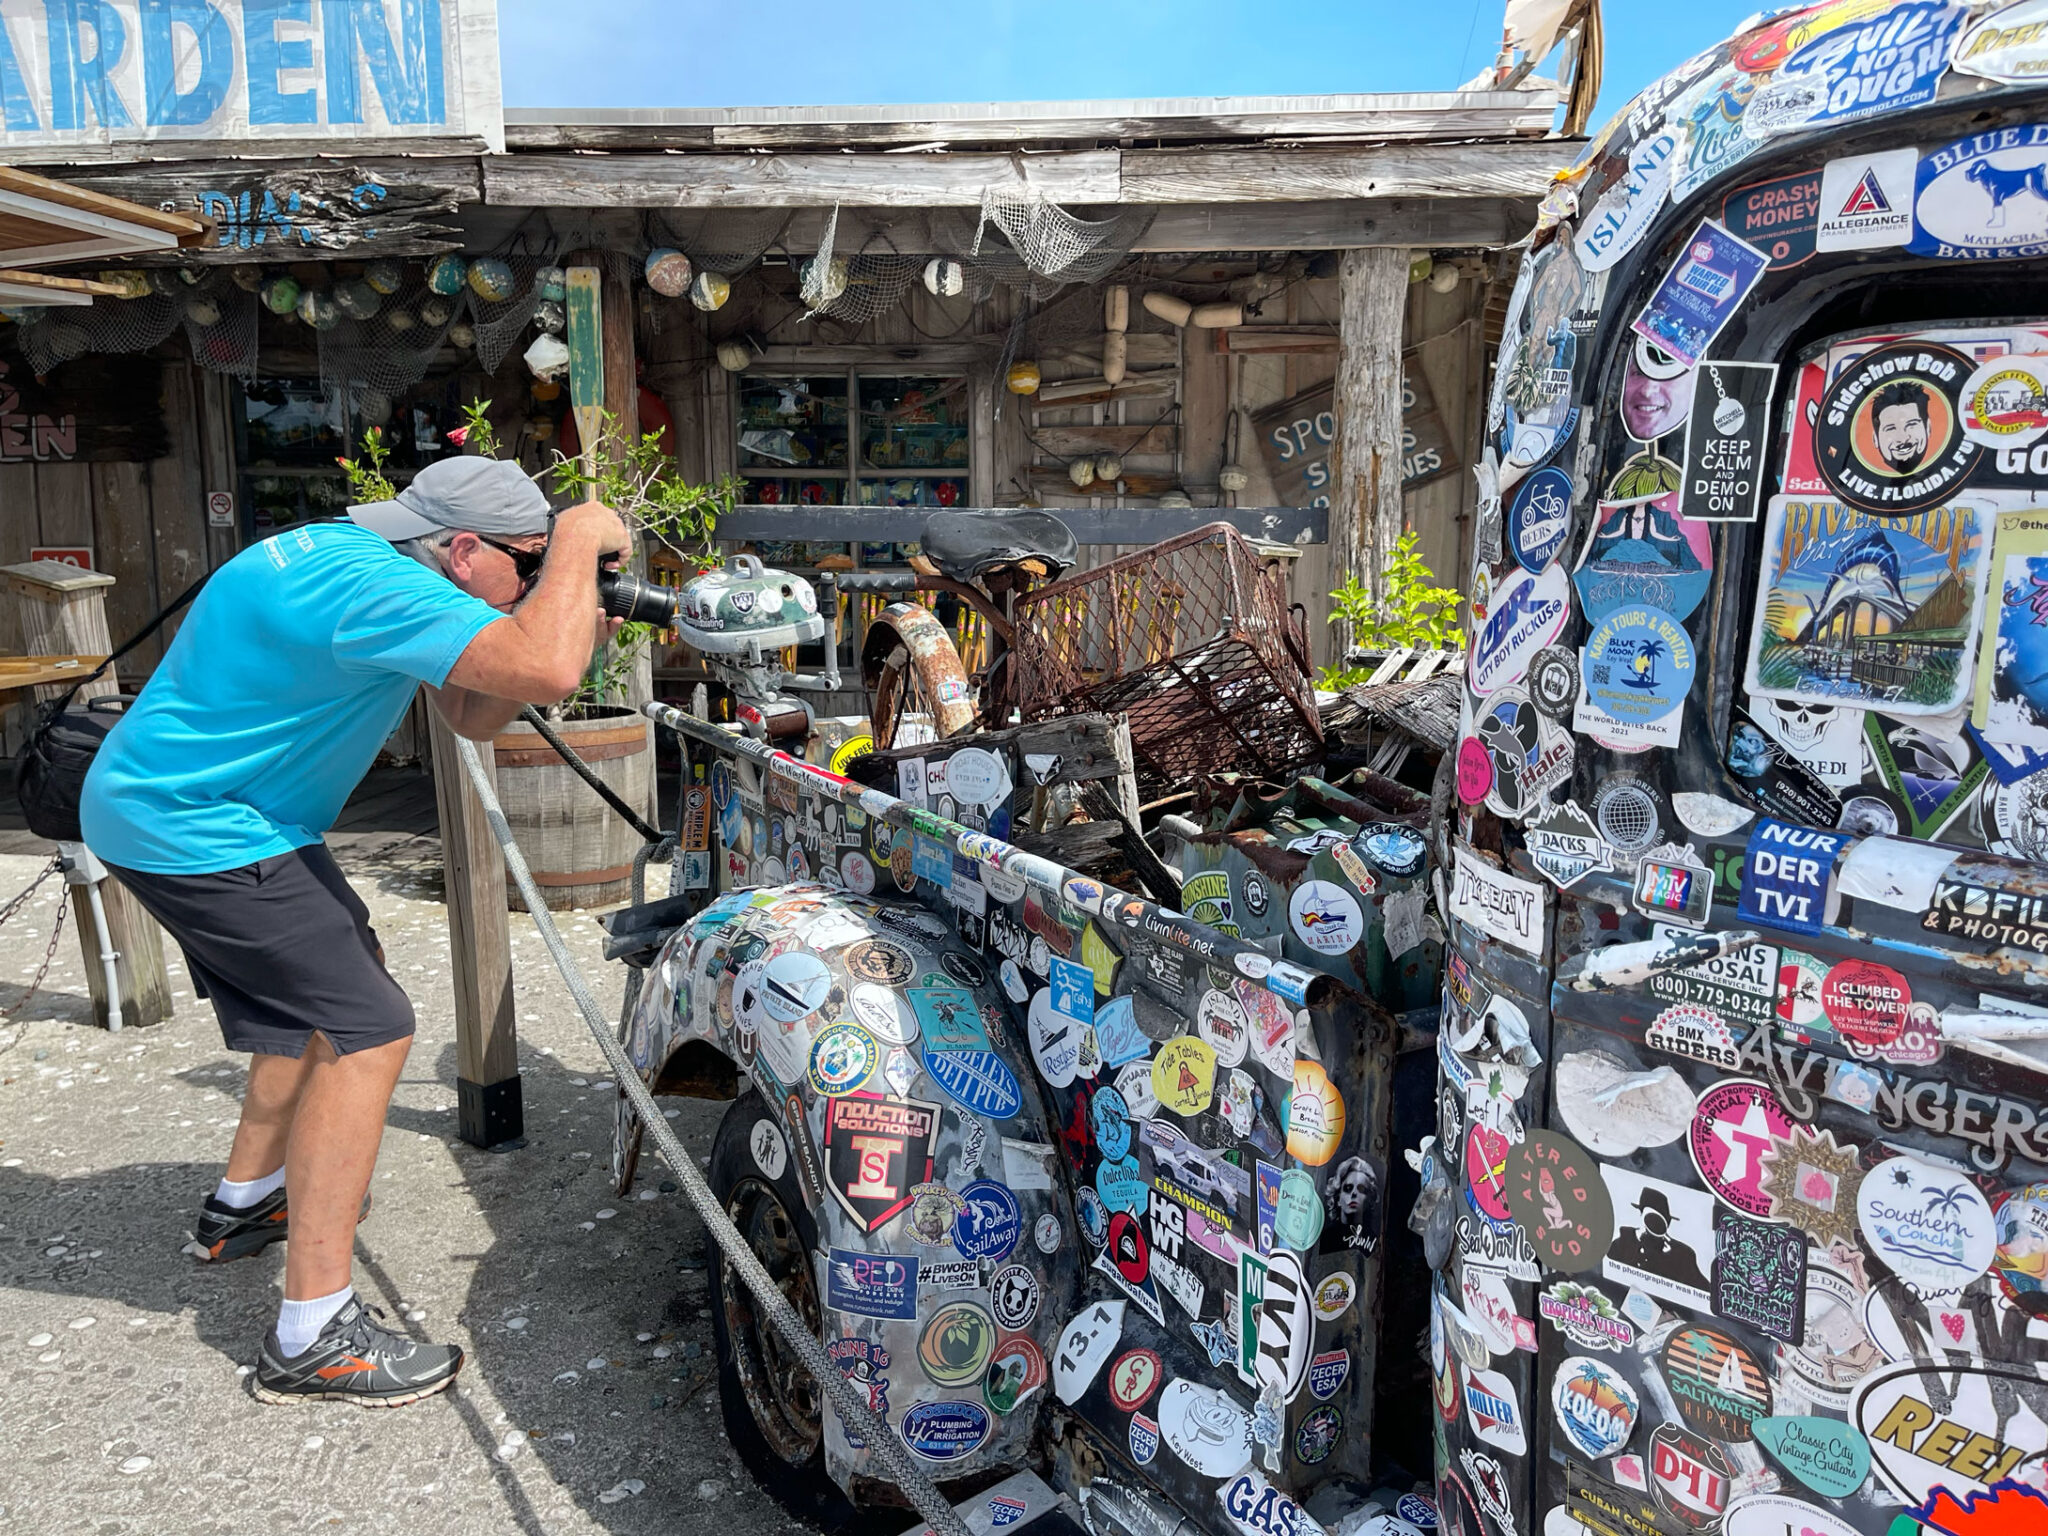 kevin taking pictures of sticker covered car in key west